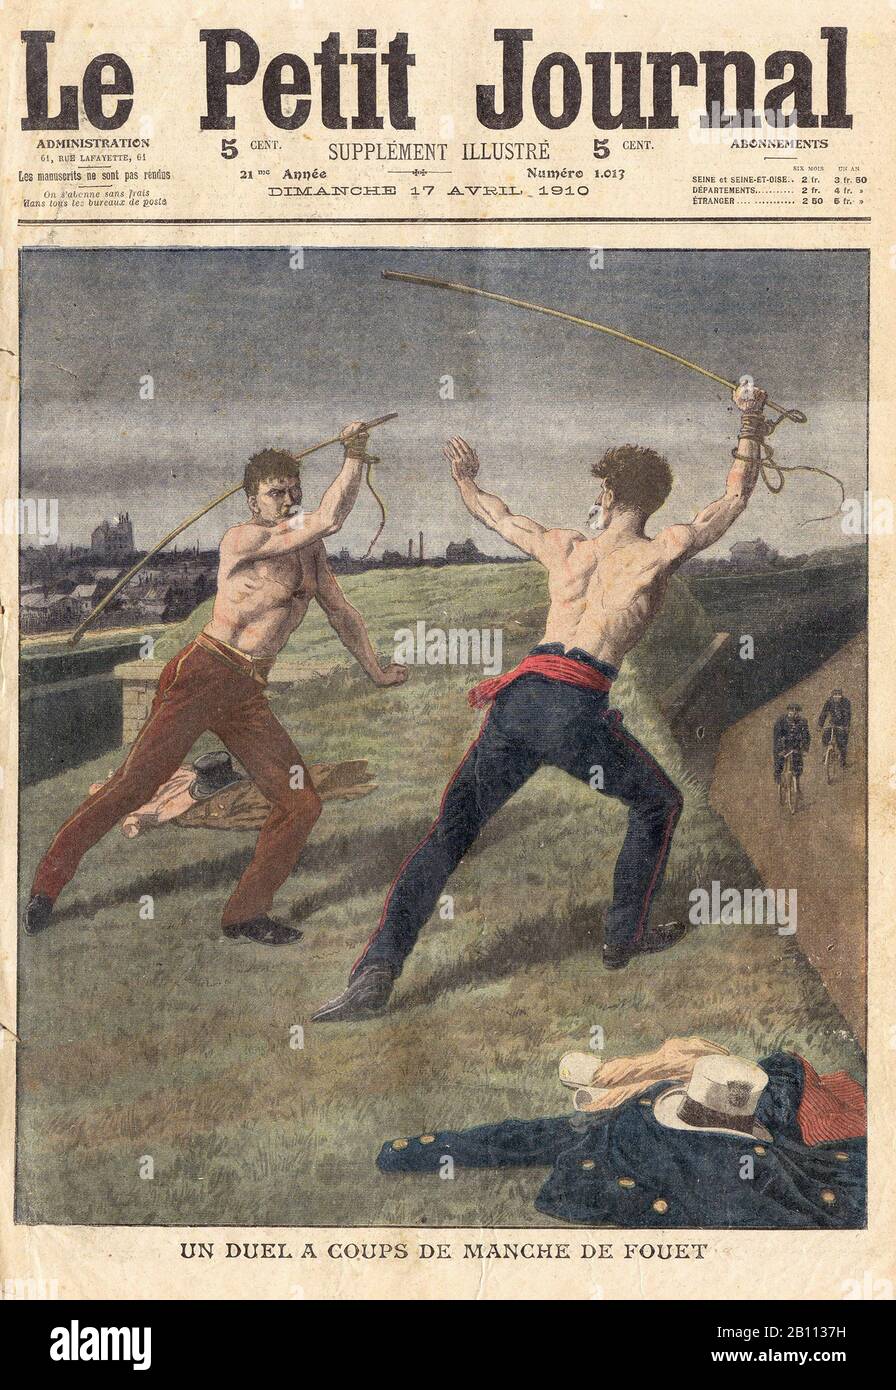 UN DUEL A COUPS DE MANCHE DE FOUET - A DUKE WITH SHOT SLEEVE - In 'Le Petit Journal' French Illustrated newspaper - 1910 Stock Photo